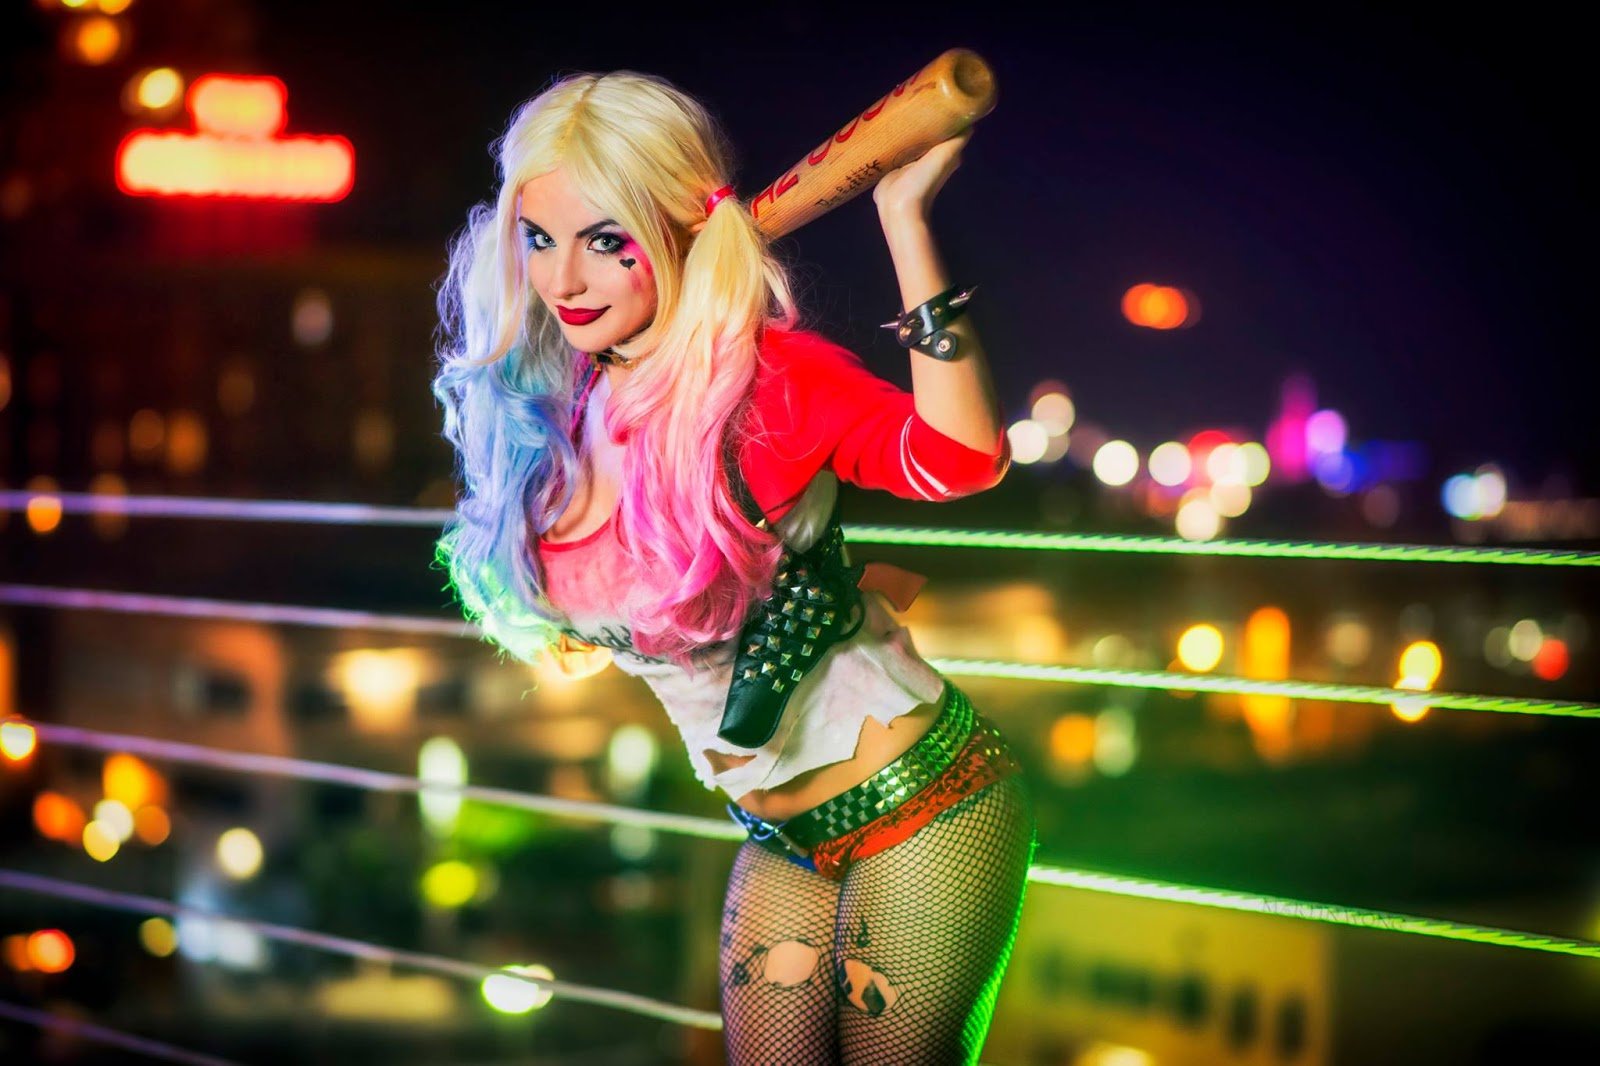 suicide, Squad, Action, Superhero, Dc comics, D c, Action, Fighting, Mystery, Comics, Harley, Quinn, Cosplay Wallpaper